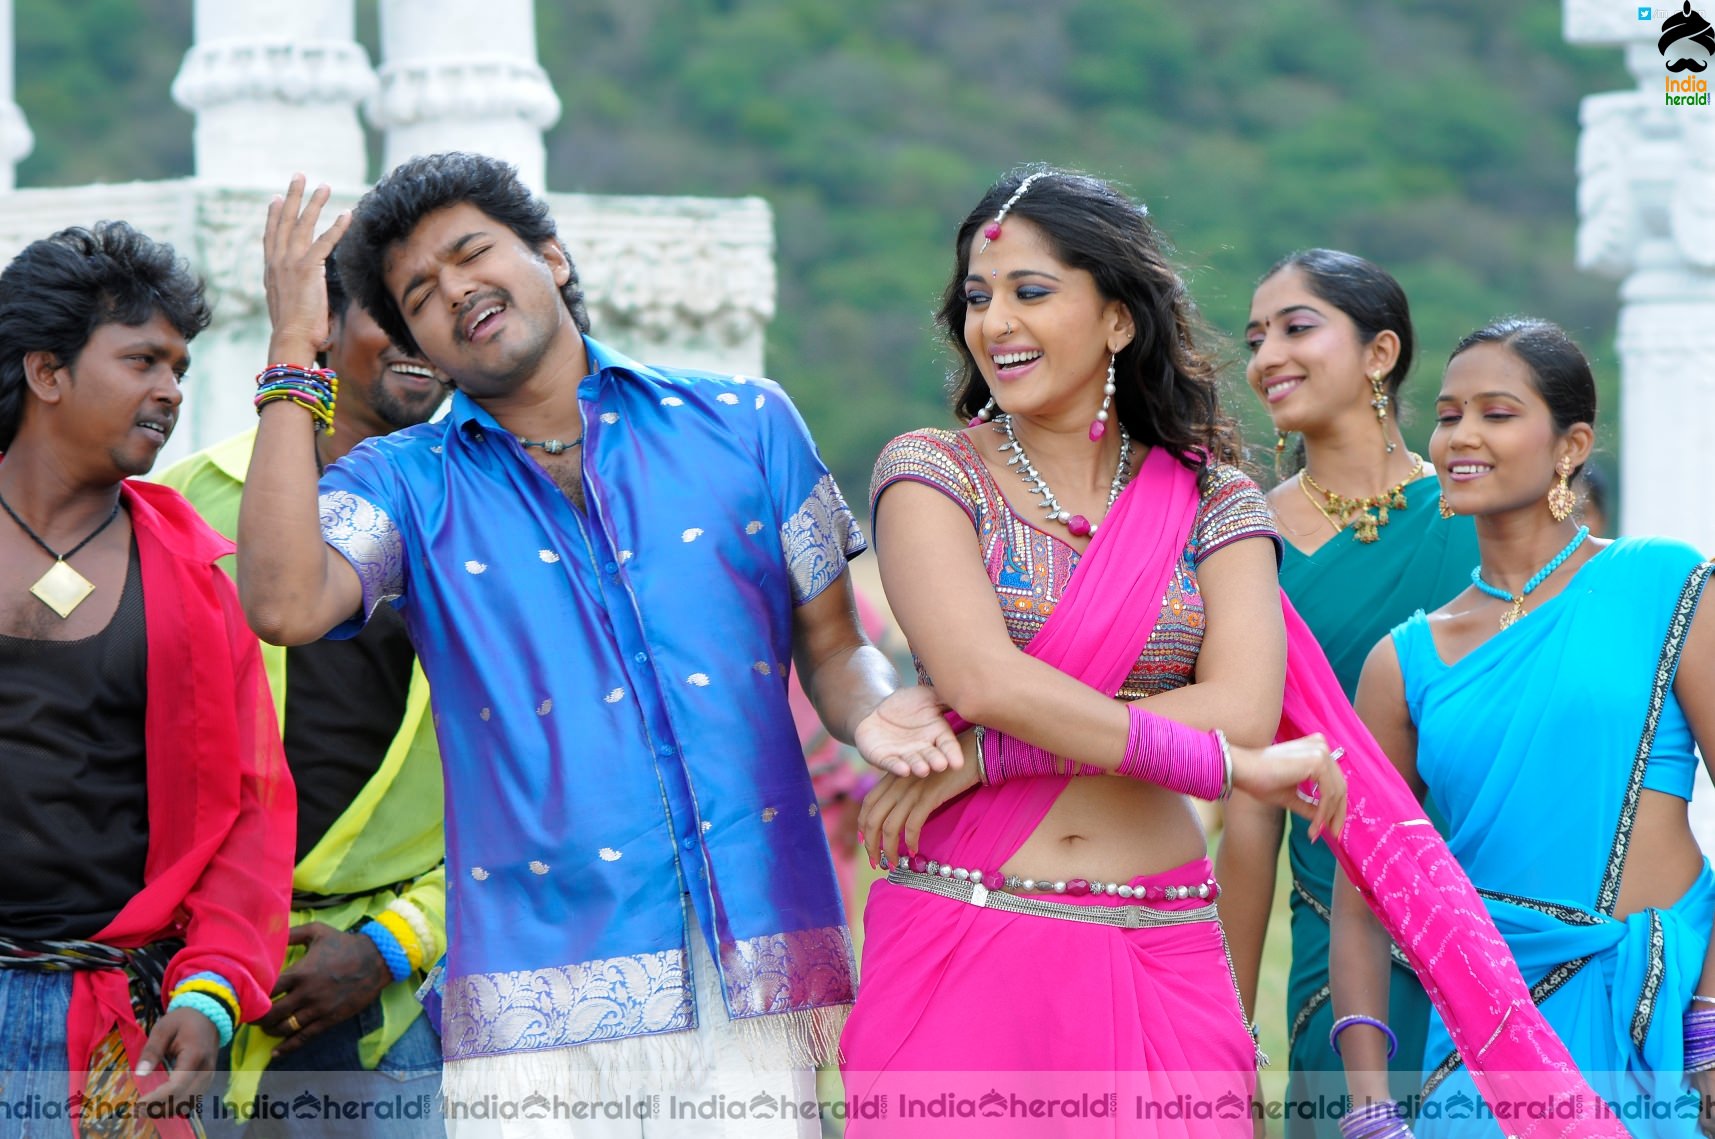 INDIA HERALD EXCLUSIVE Hot Anushka Shetty and Vijay in a Tamil movie during Early Stages Set 2